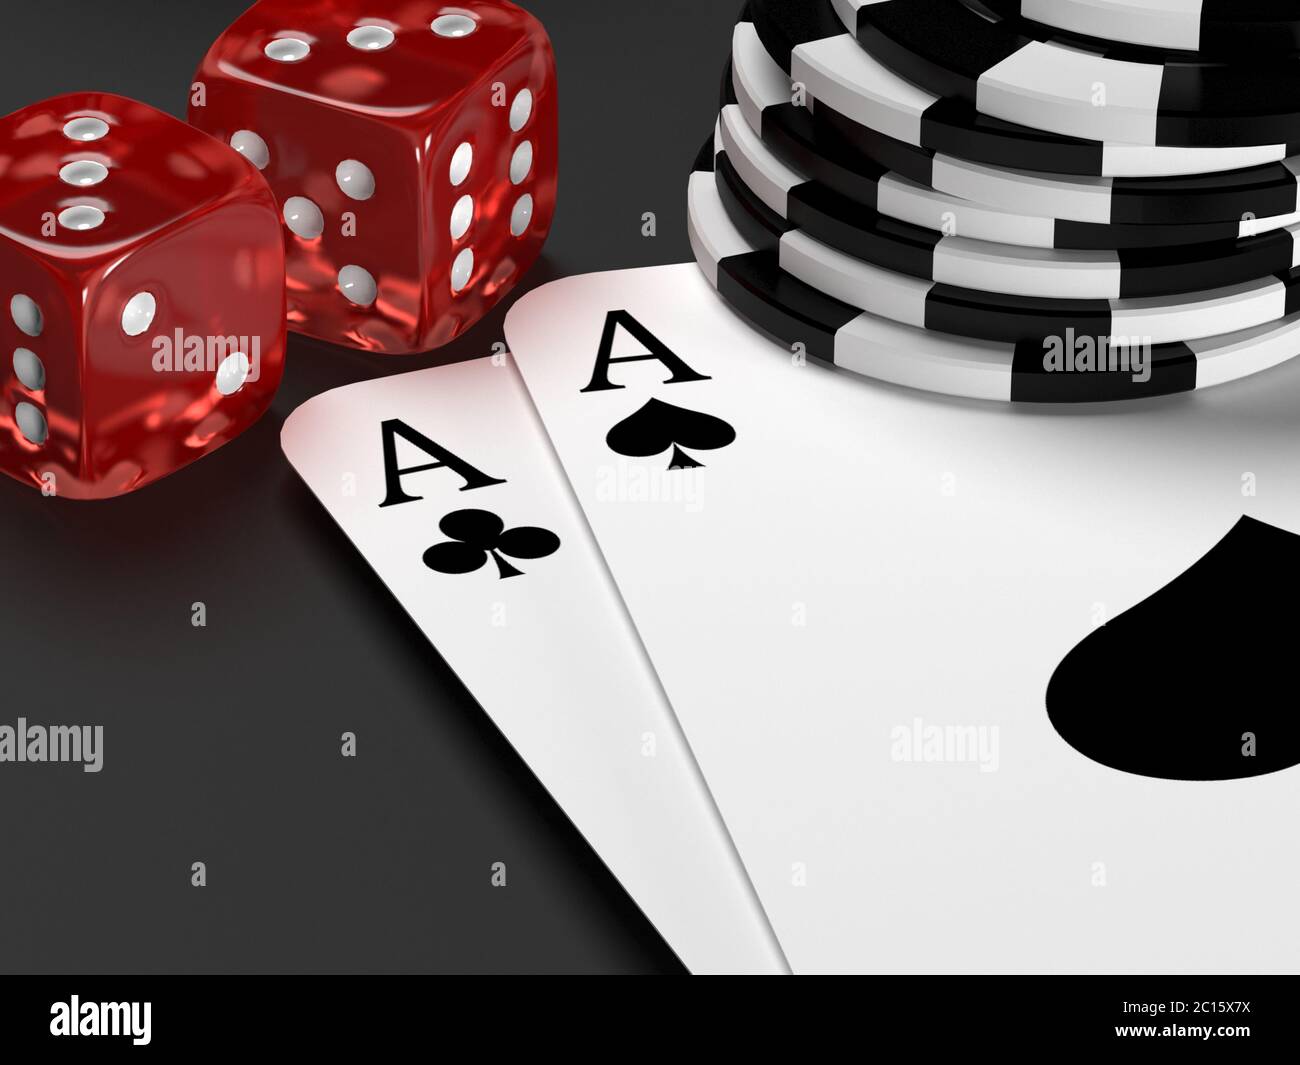 Casino theme background with Ace pair hand, red dice and stack of black chips. 3D illustration Stock Photo